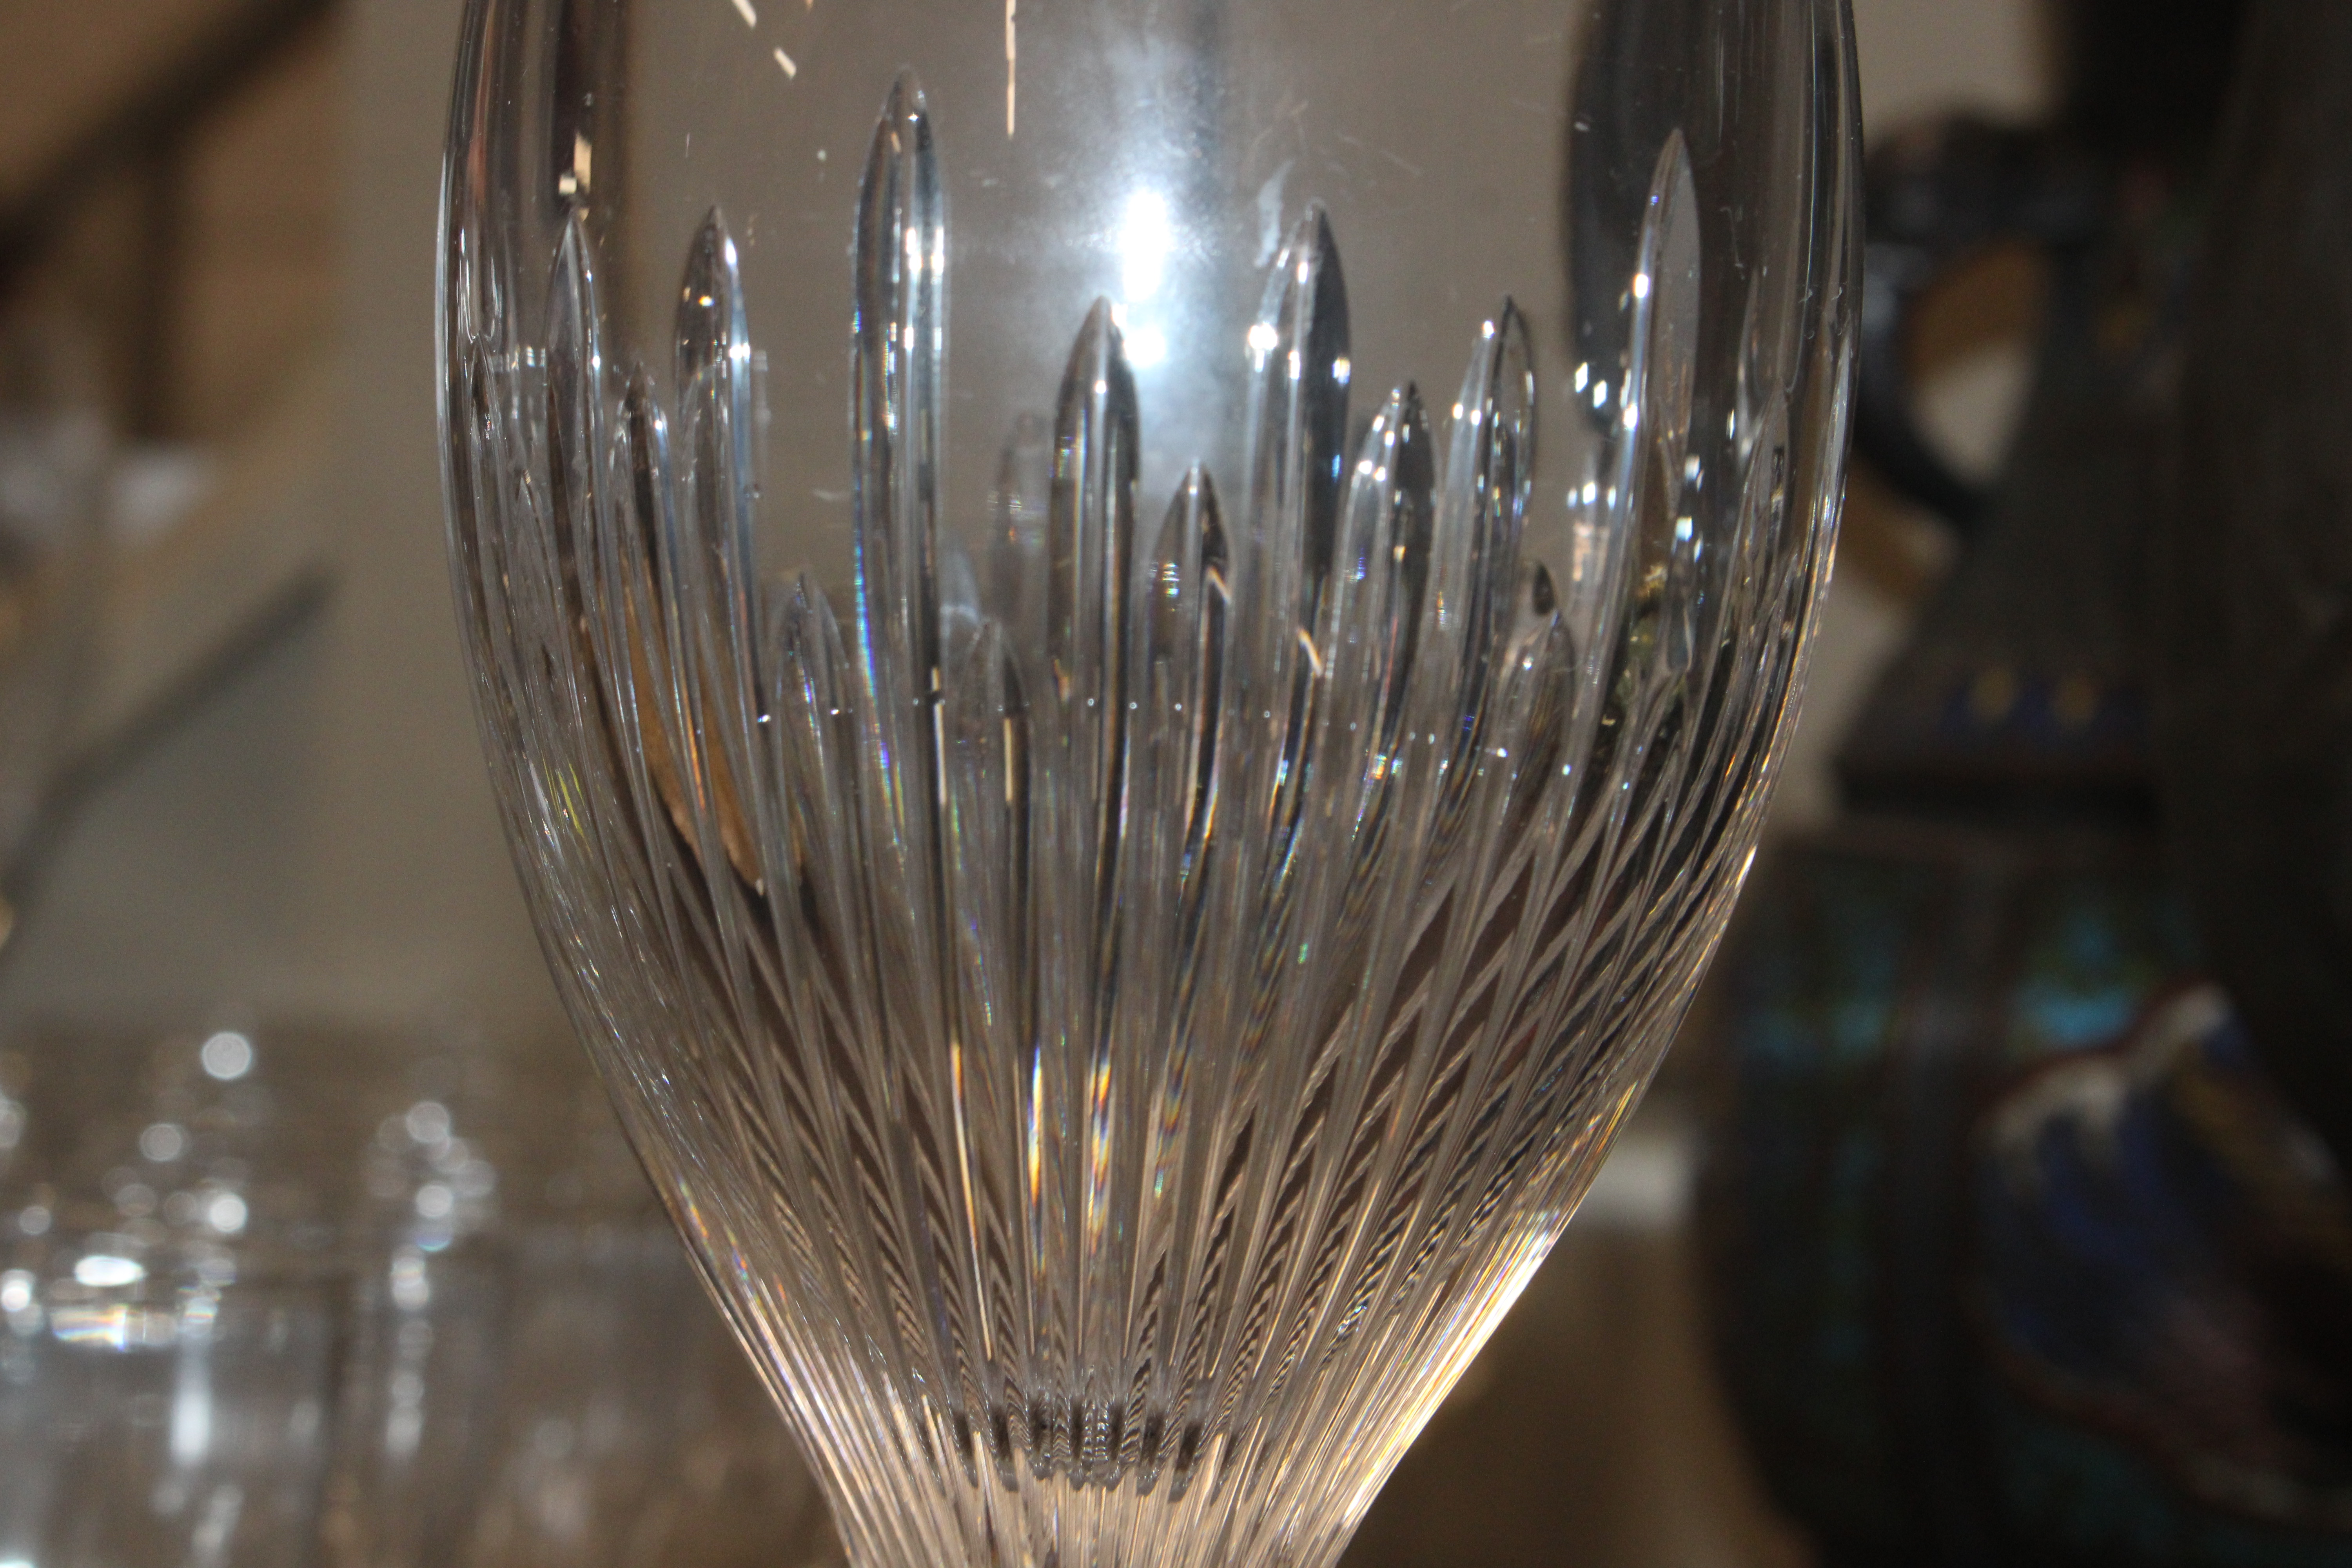 Waterford Jasper Conran wine glasses and various W - Image 8 of 15